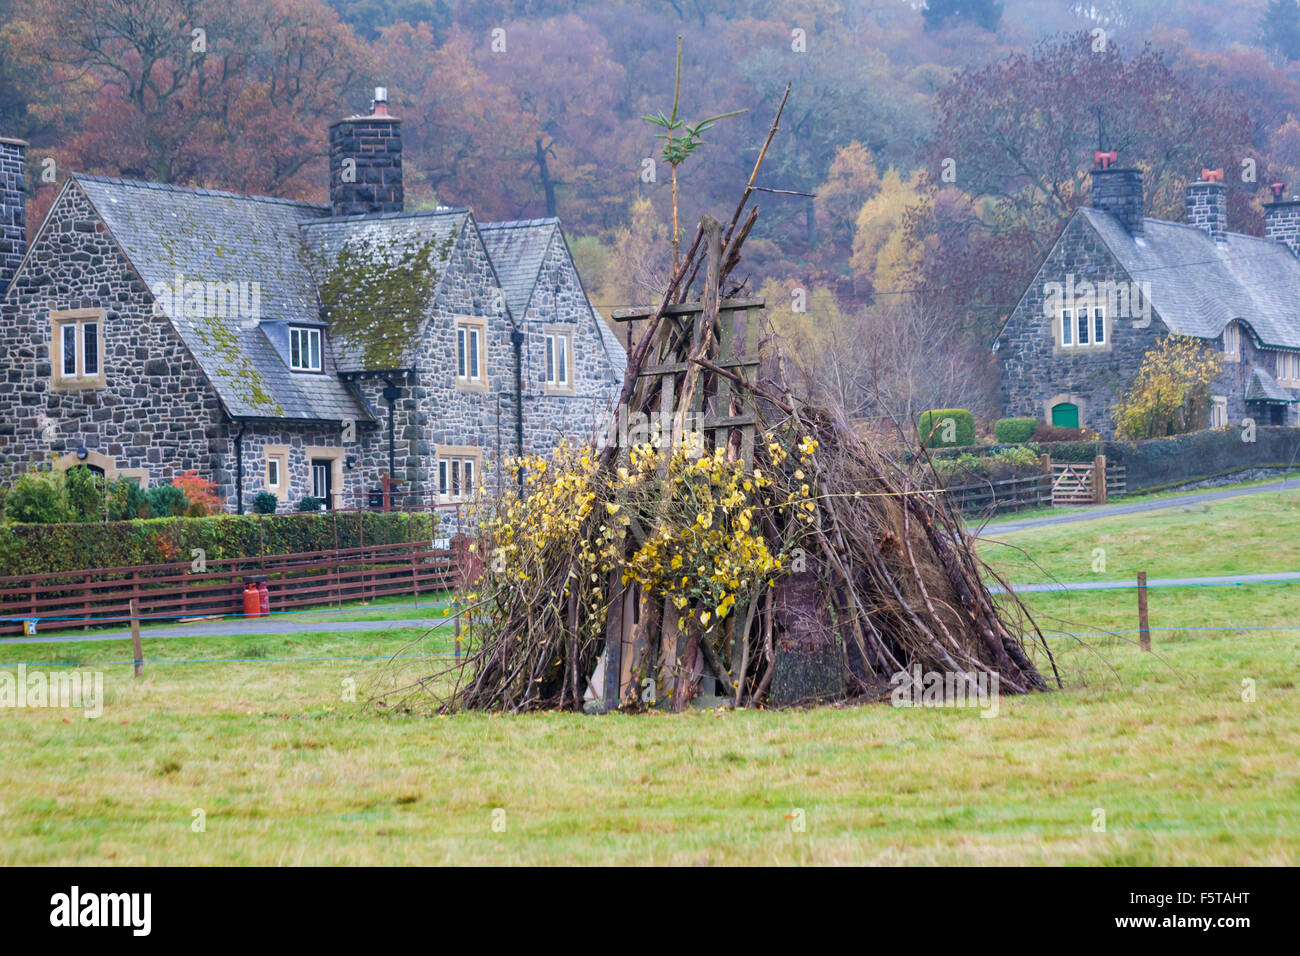 Houses in Autumn colours and bonfire ready for bonfire night at Elan village in Elan Valley, Powys, Mid Wales, UK in November Stock Photo